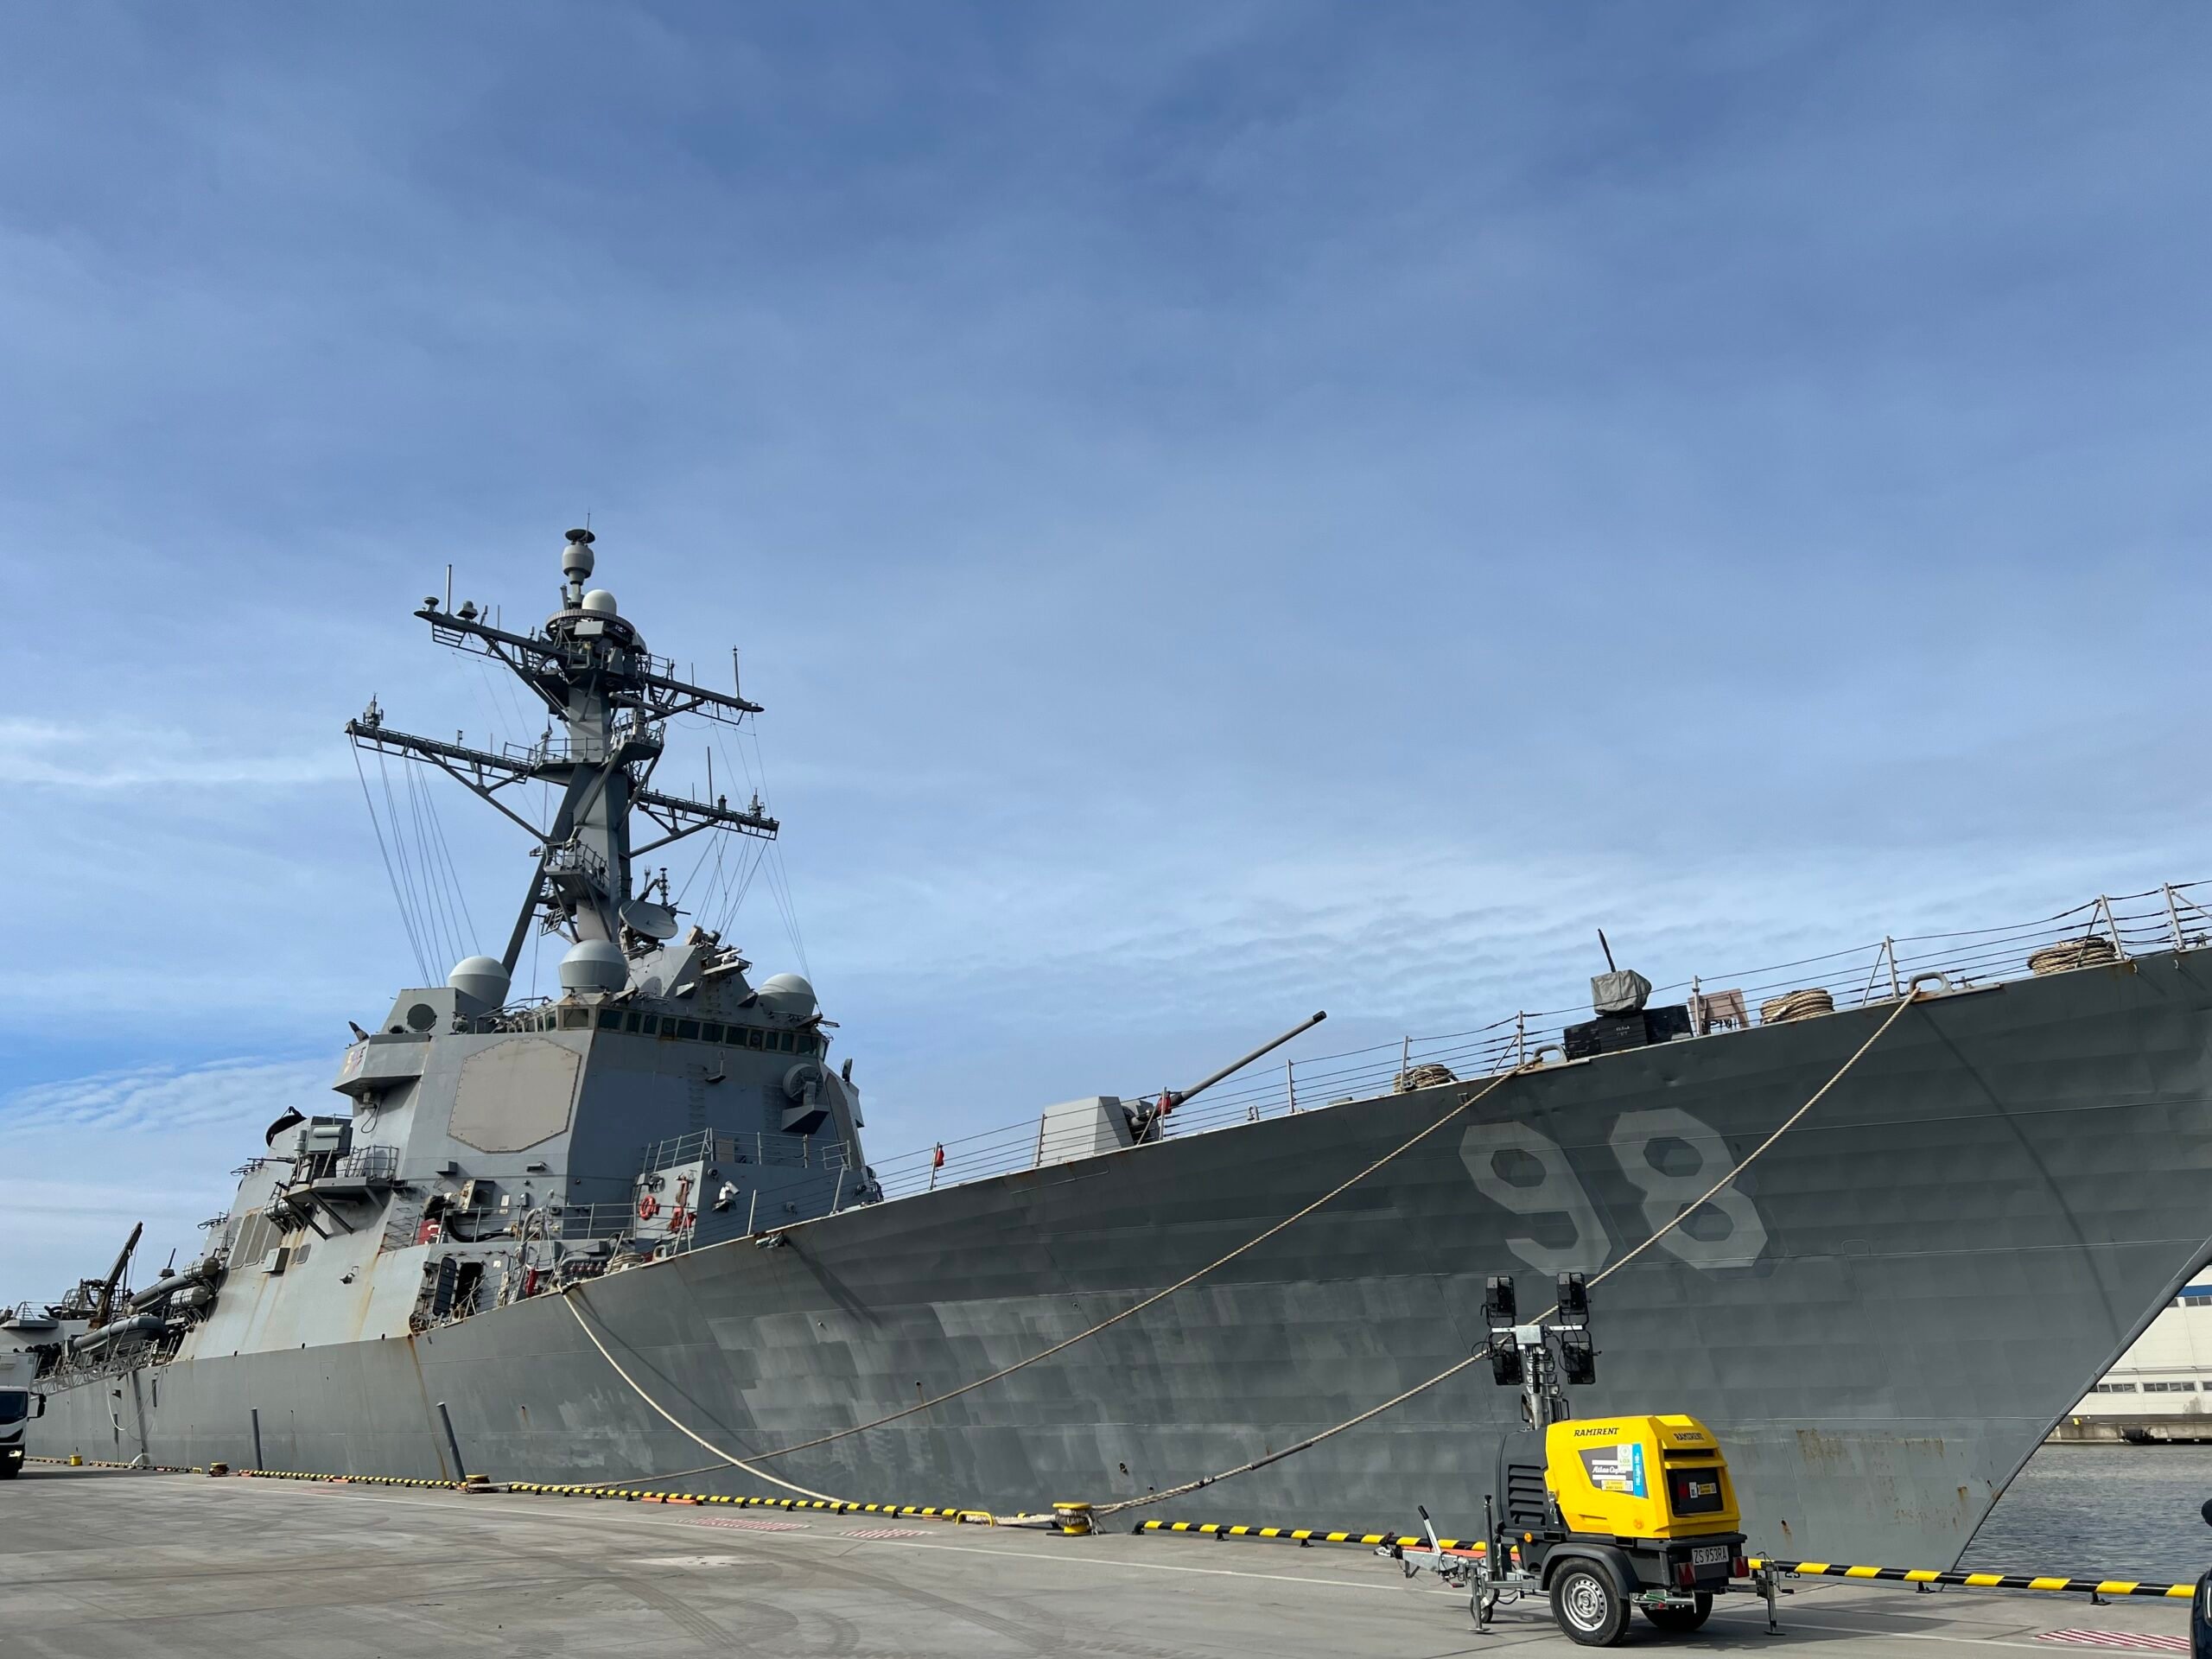 US Navy guided missile Poland arrives in destroyer